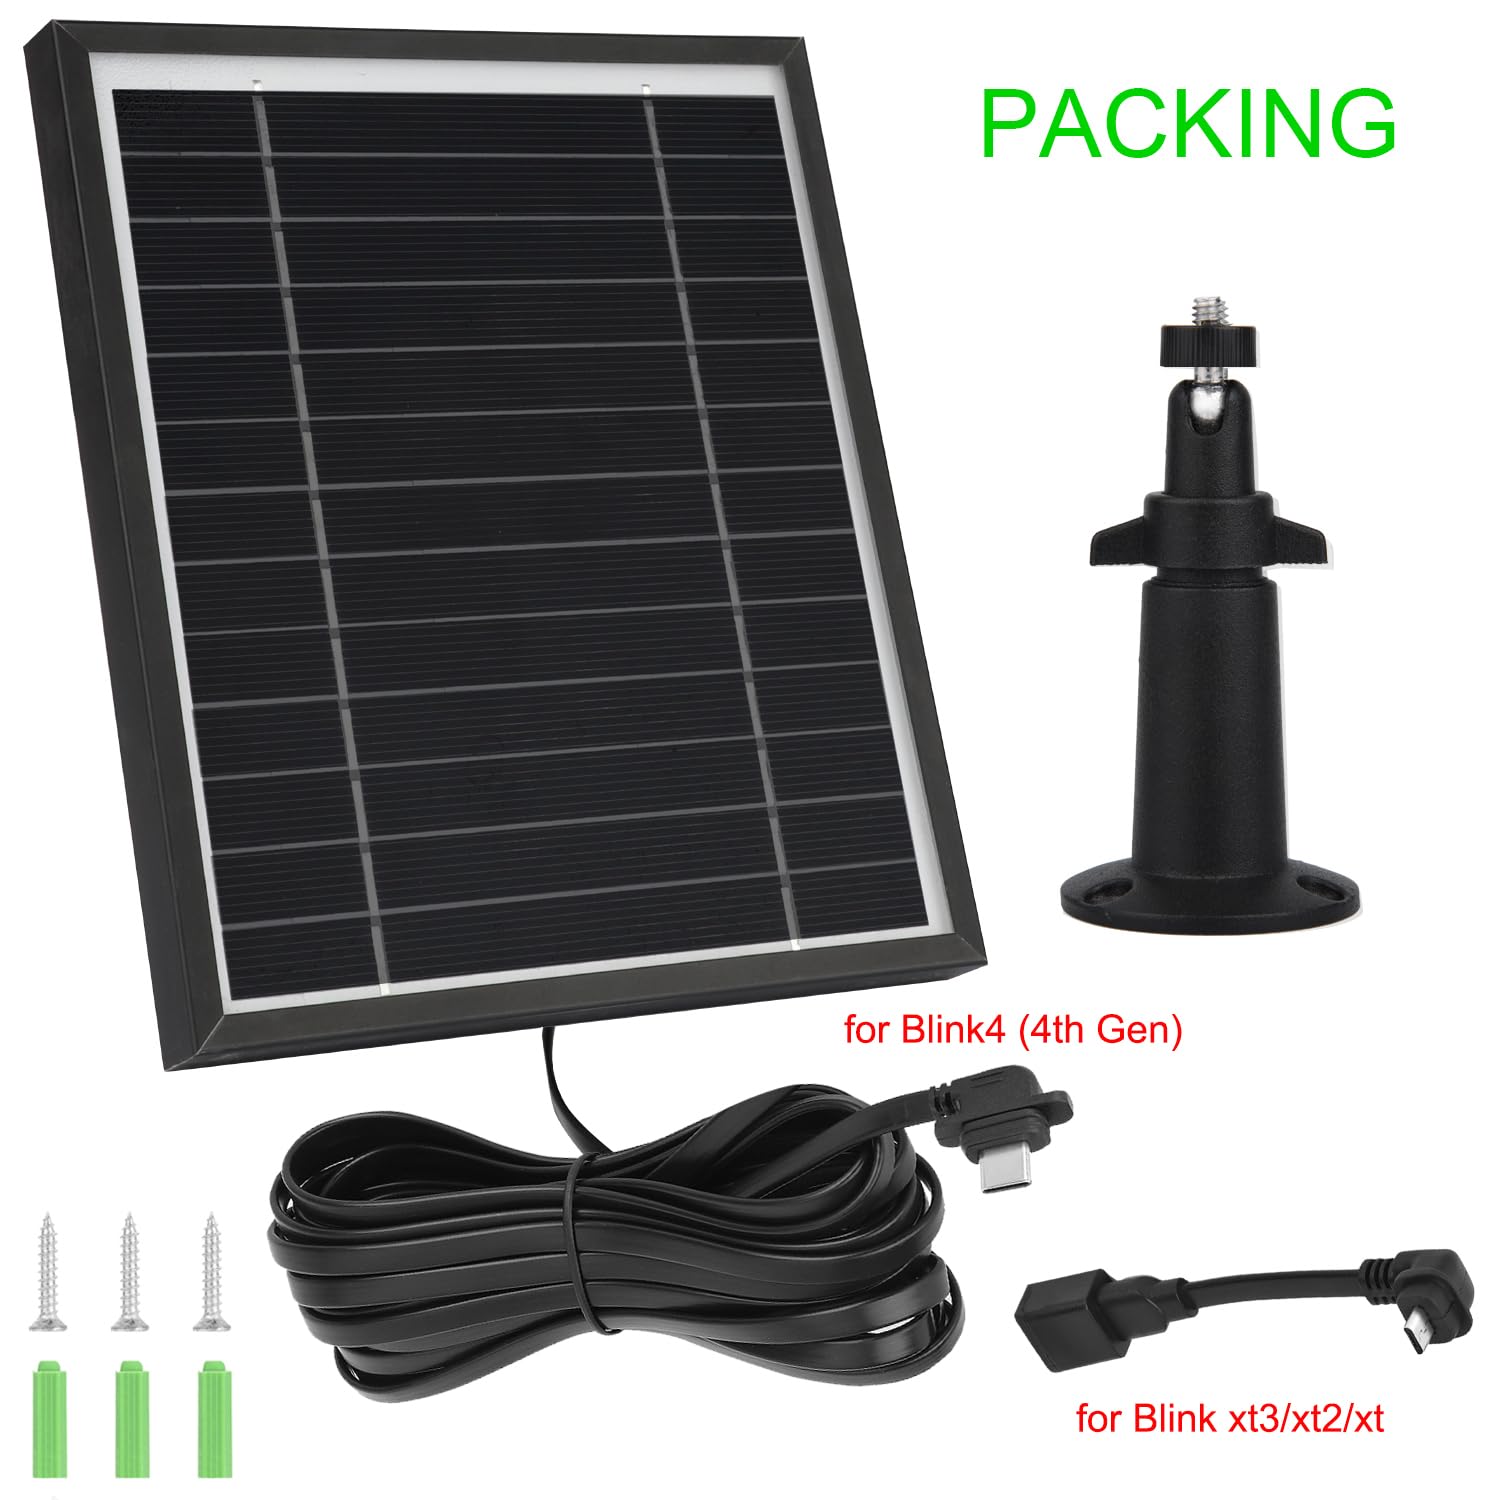 Uogw Solar Panel Compatible with Blink Outdoor 4(4th Gen)/Blink (3rd Gen)&Blink XT2/XT Camera,with Internal 2500mAh Rechargeable Battery&11.5ft Charging Cable,Weather-Resistant Aluminium Alloy-3PACK